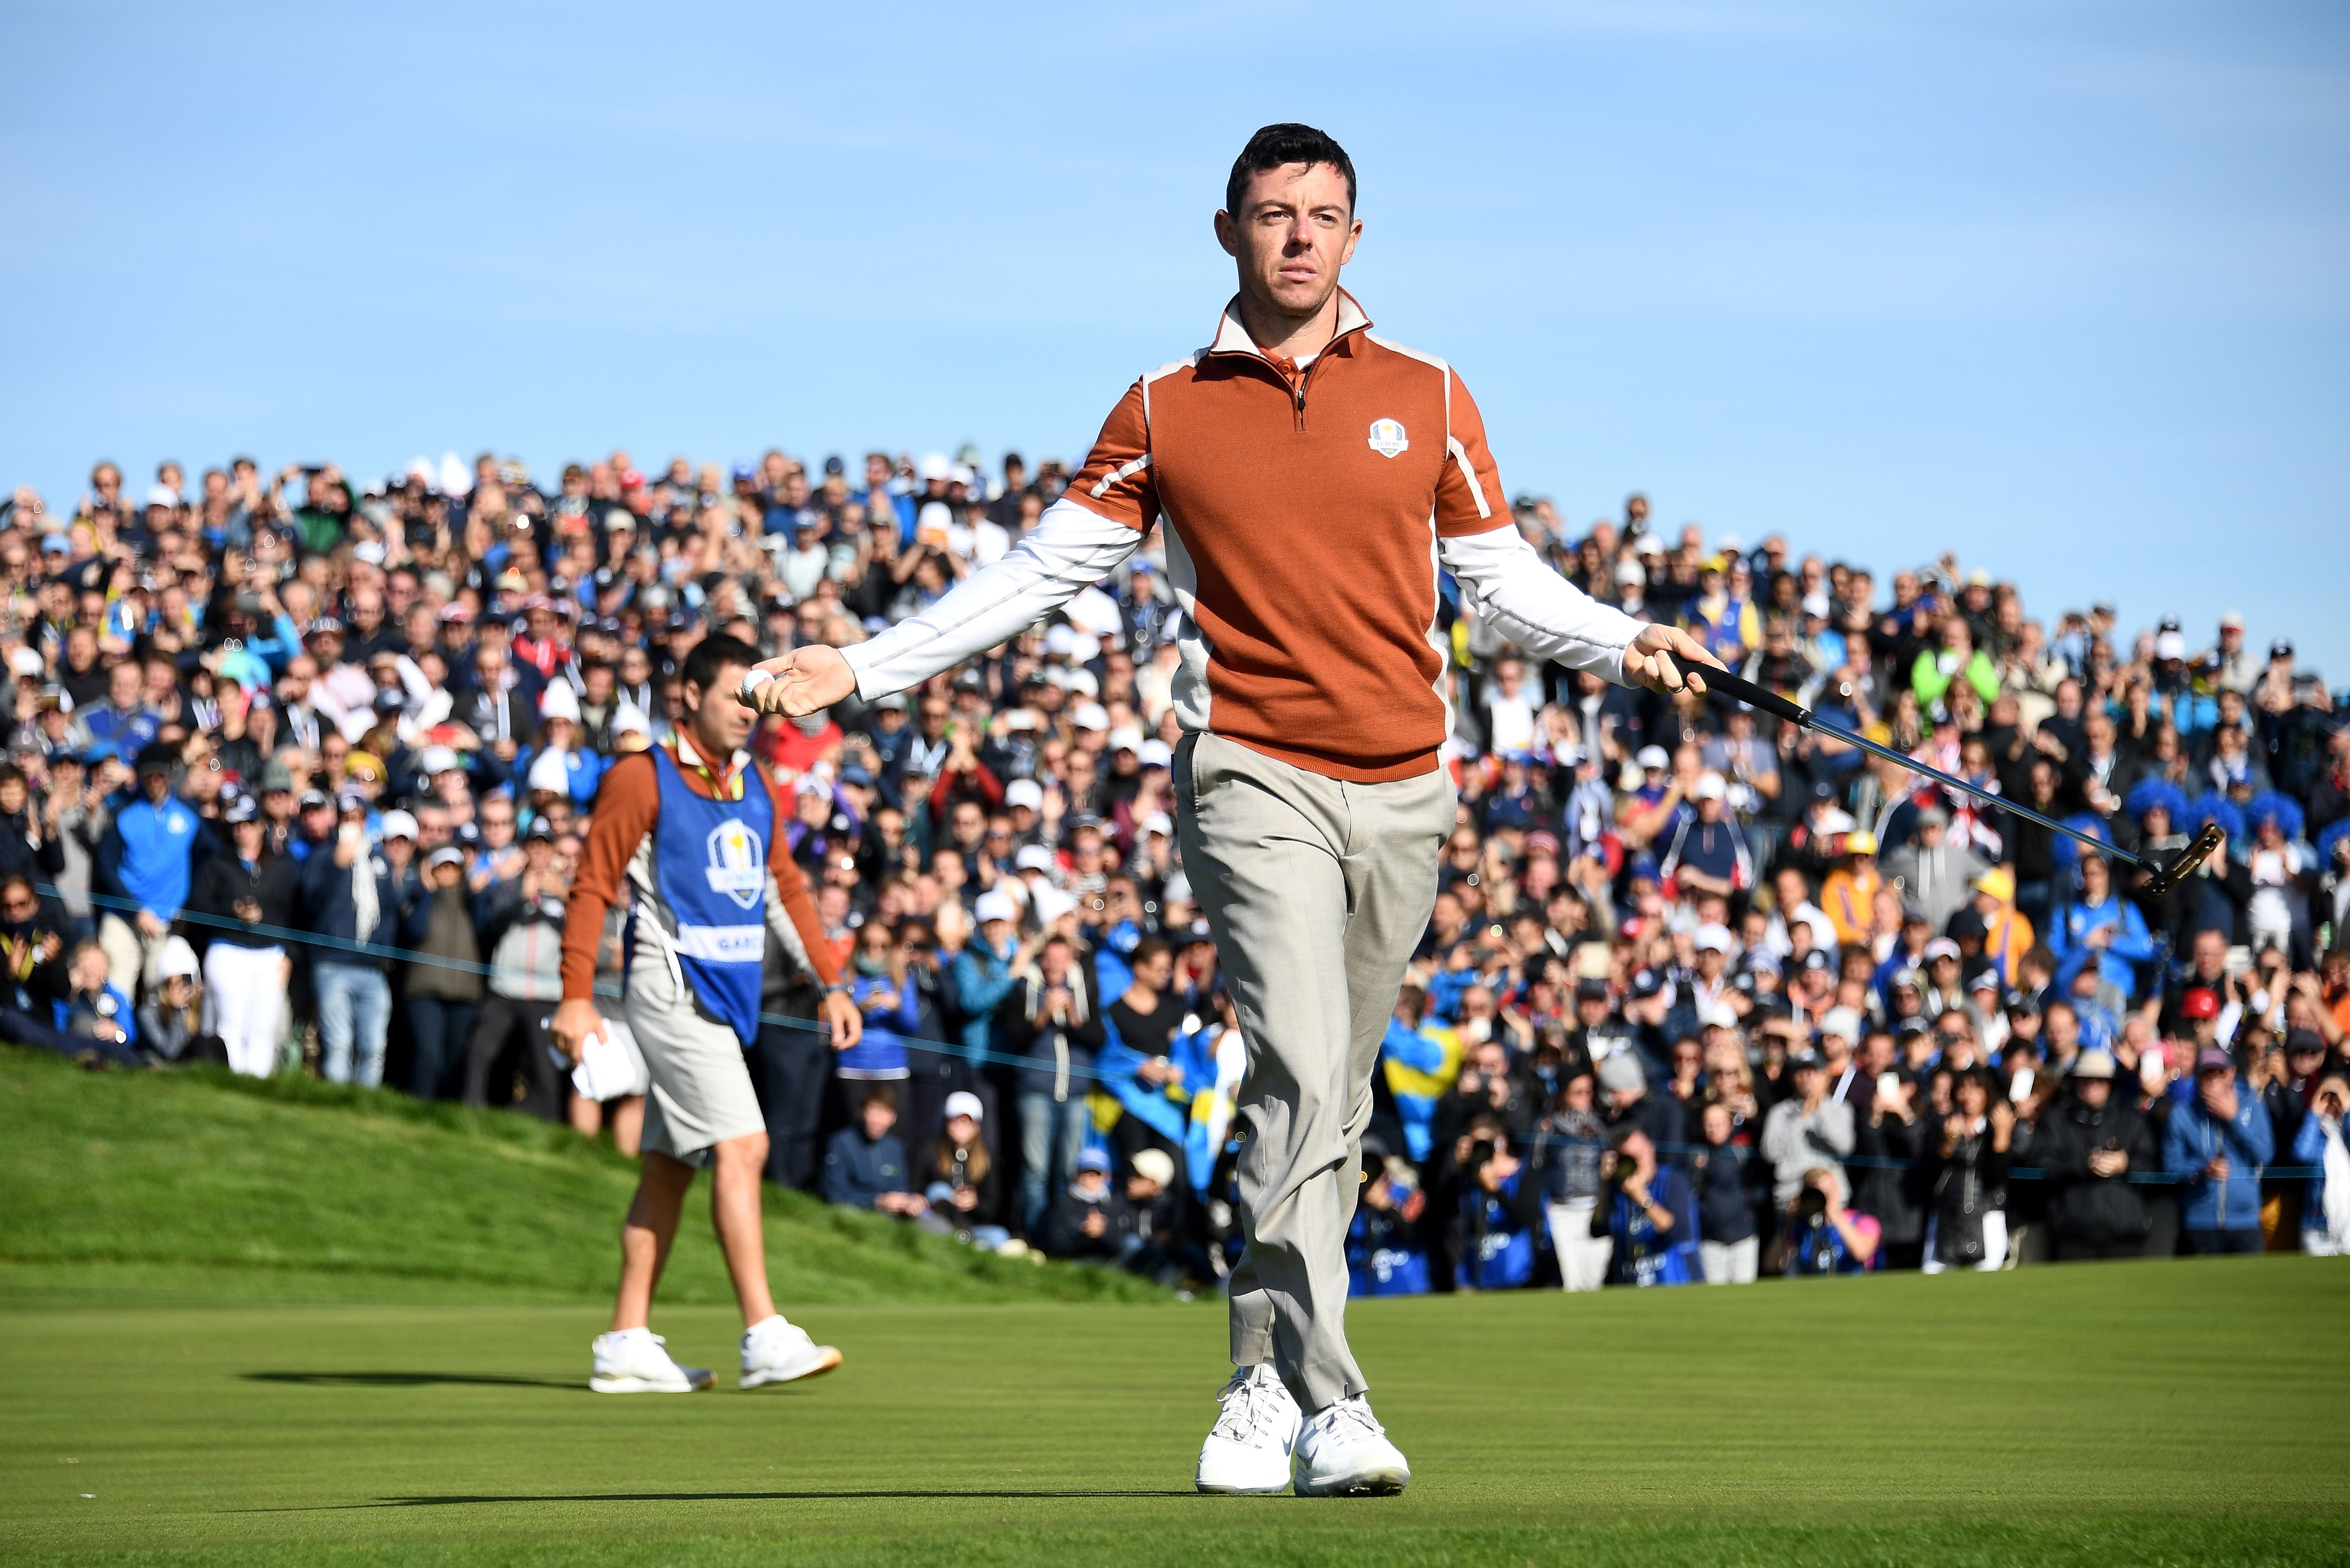 Europe strengthen advantage on Saturday morning at Ryder Cup